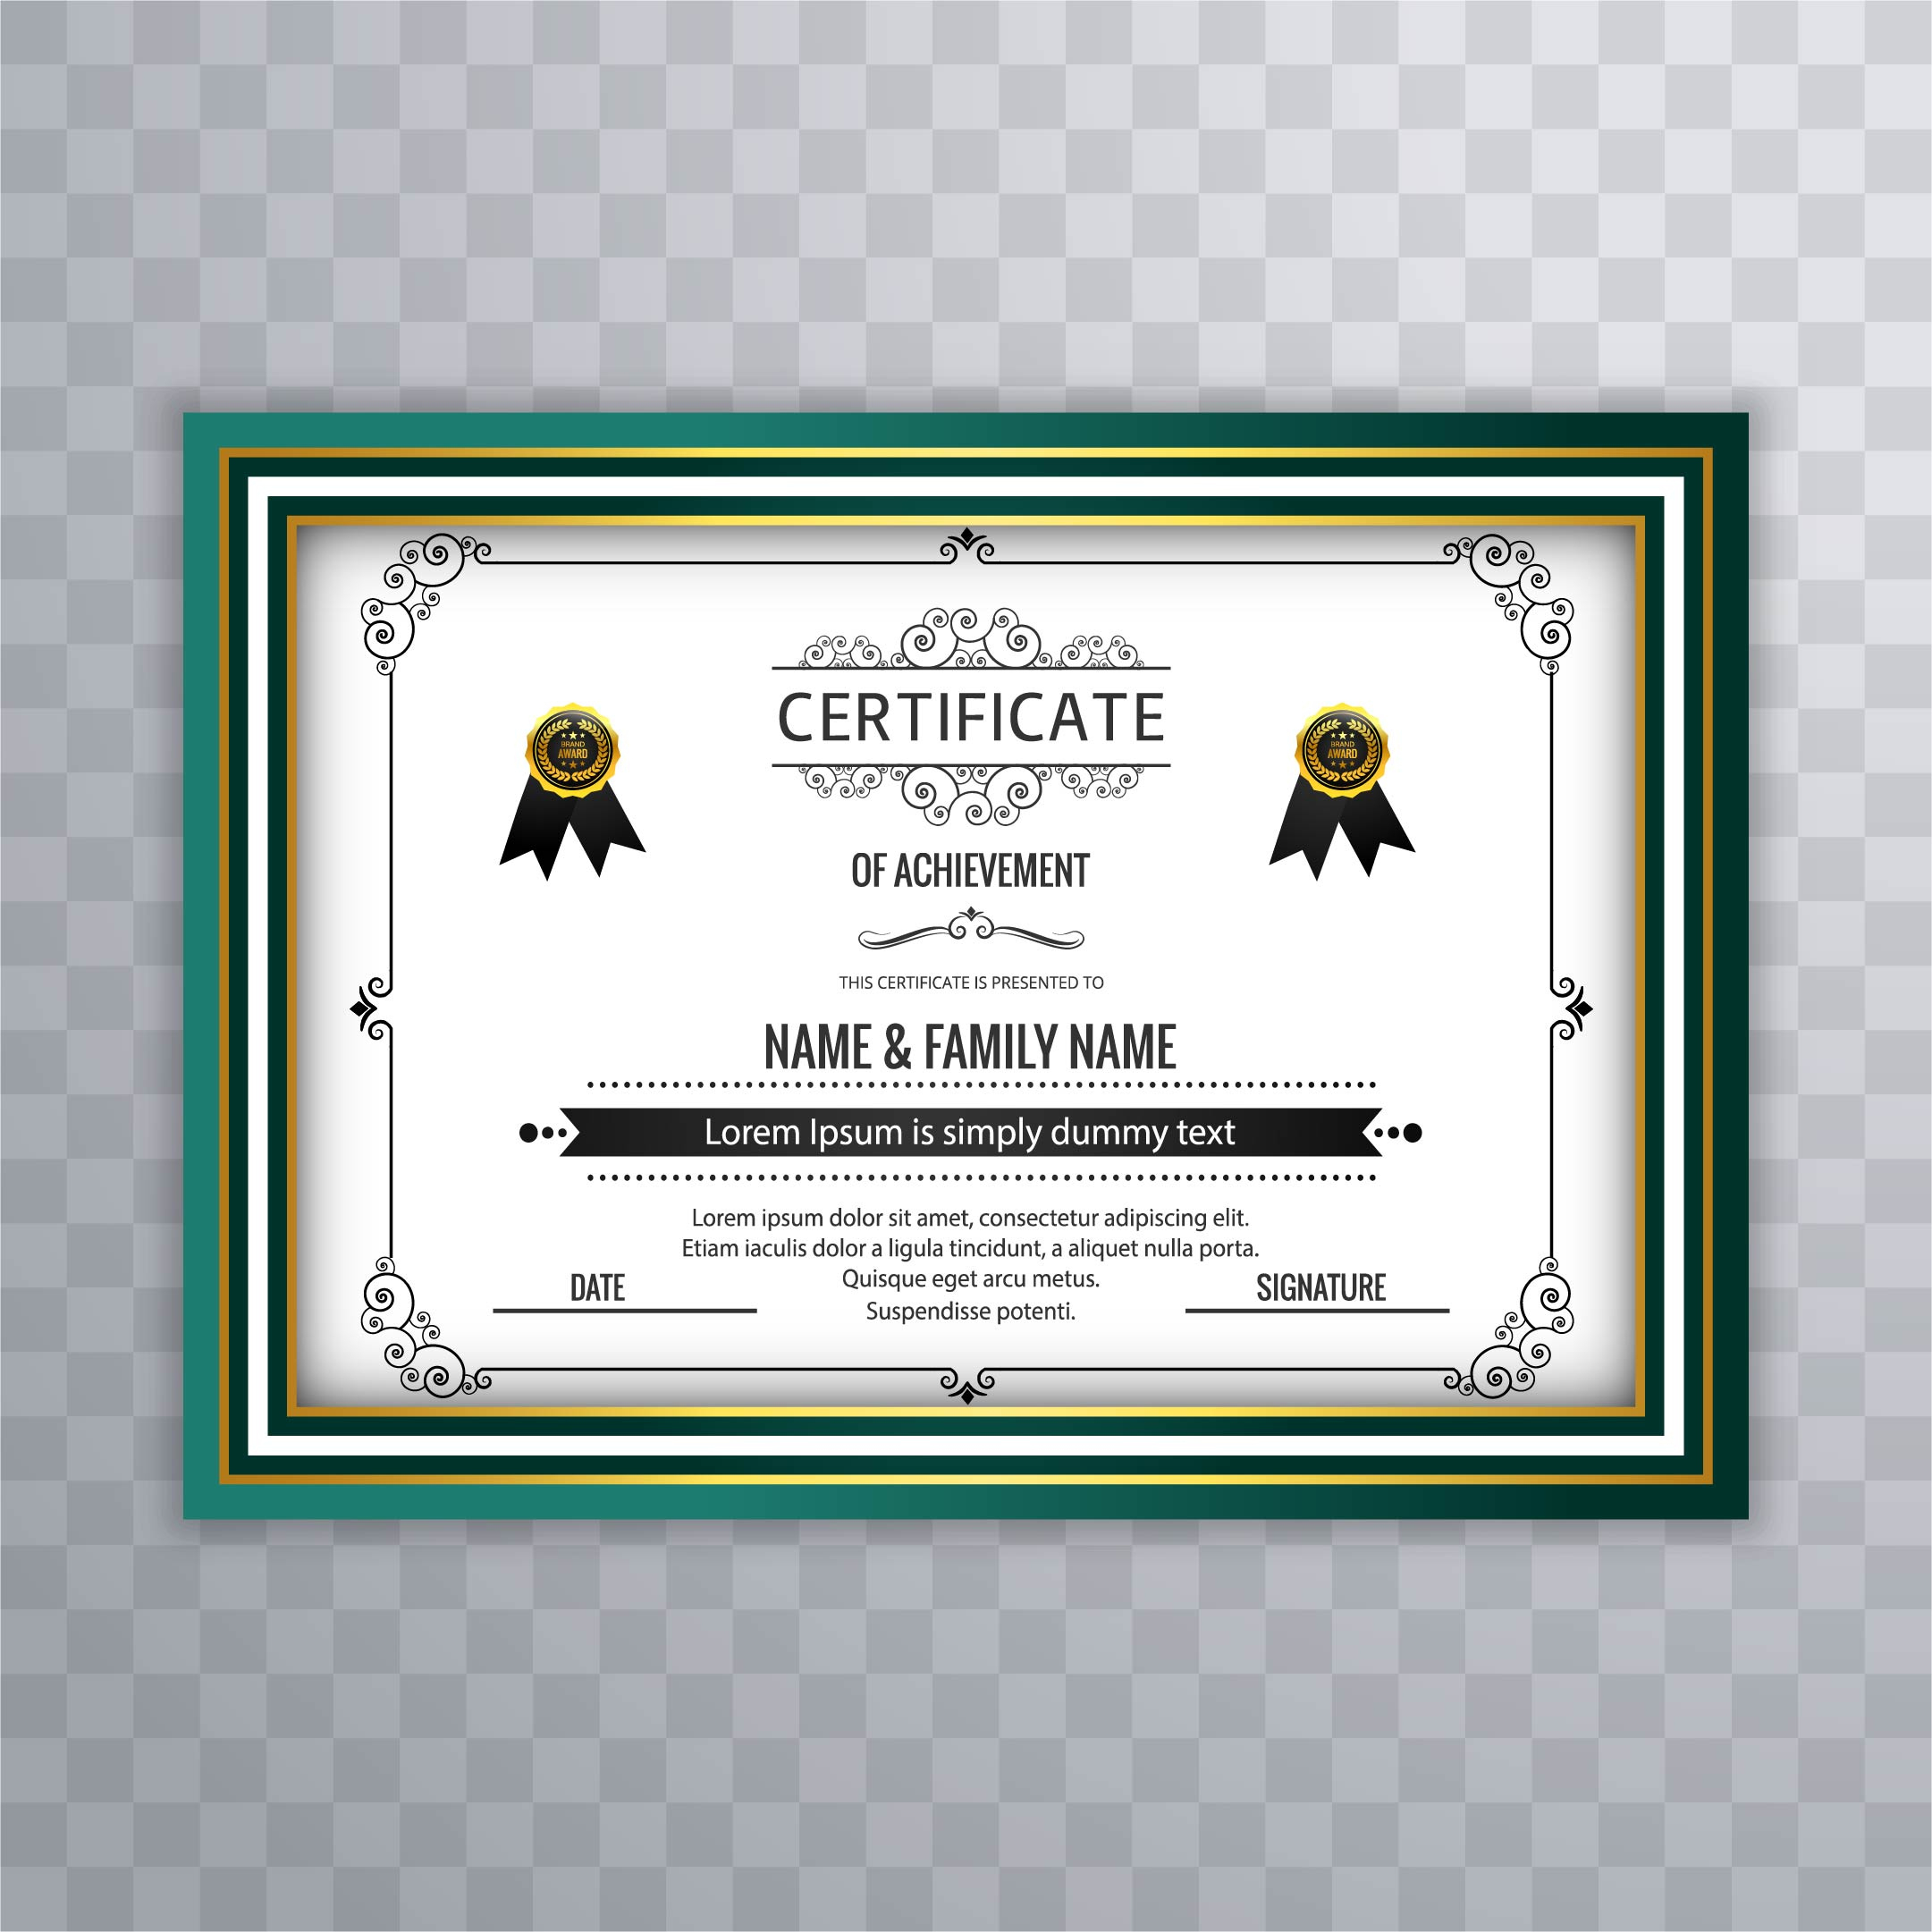 Abstract Beautiful Certificate Template Design Vector 258941 Vector Art for Beautiful Certificate Templates